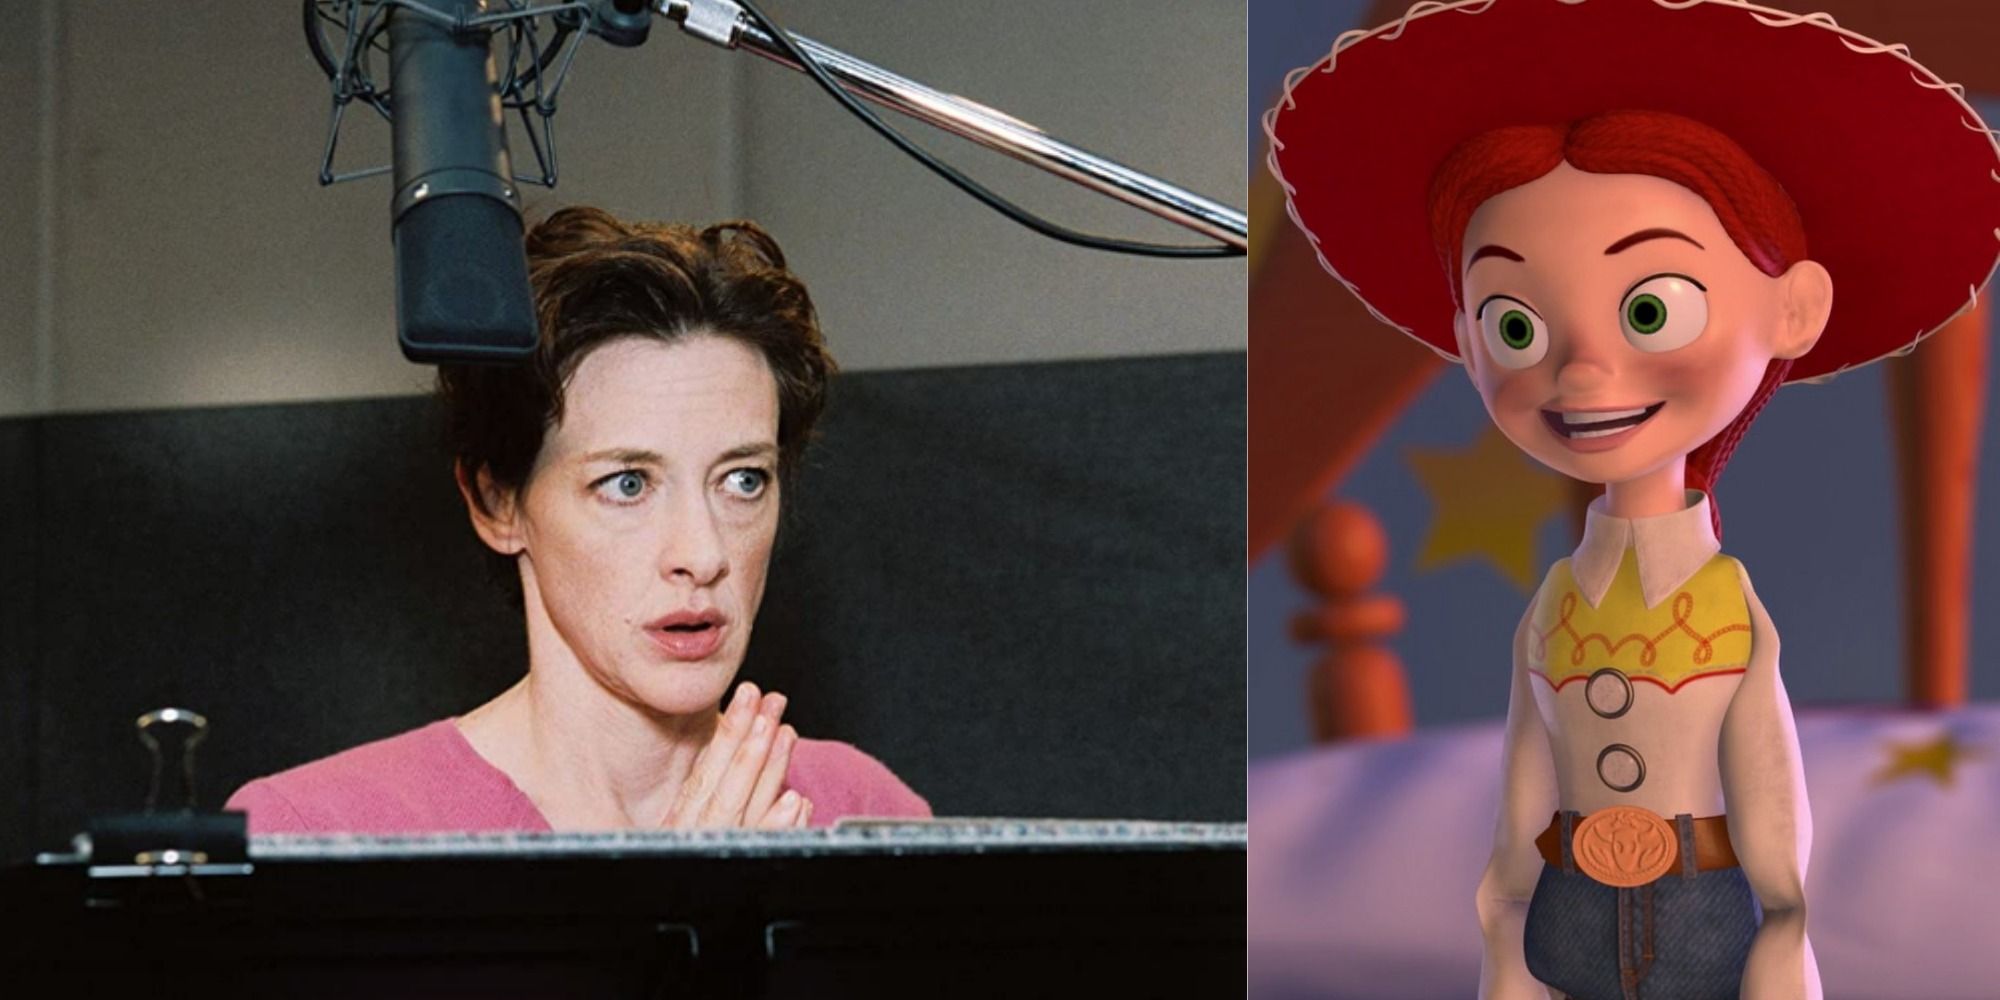 A side-by-side comparison of Joan Cusack and Jessie the Cowgirl from the Toy Story franchise